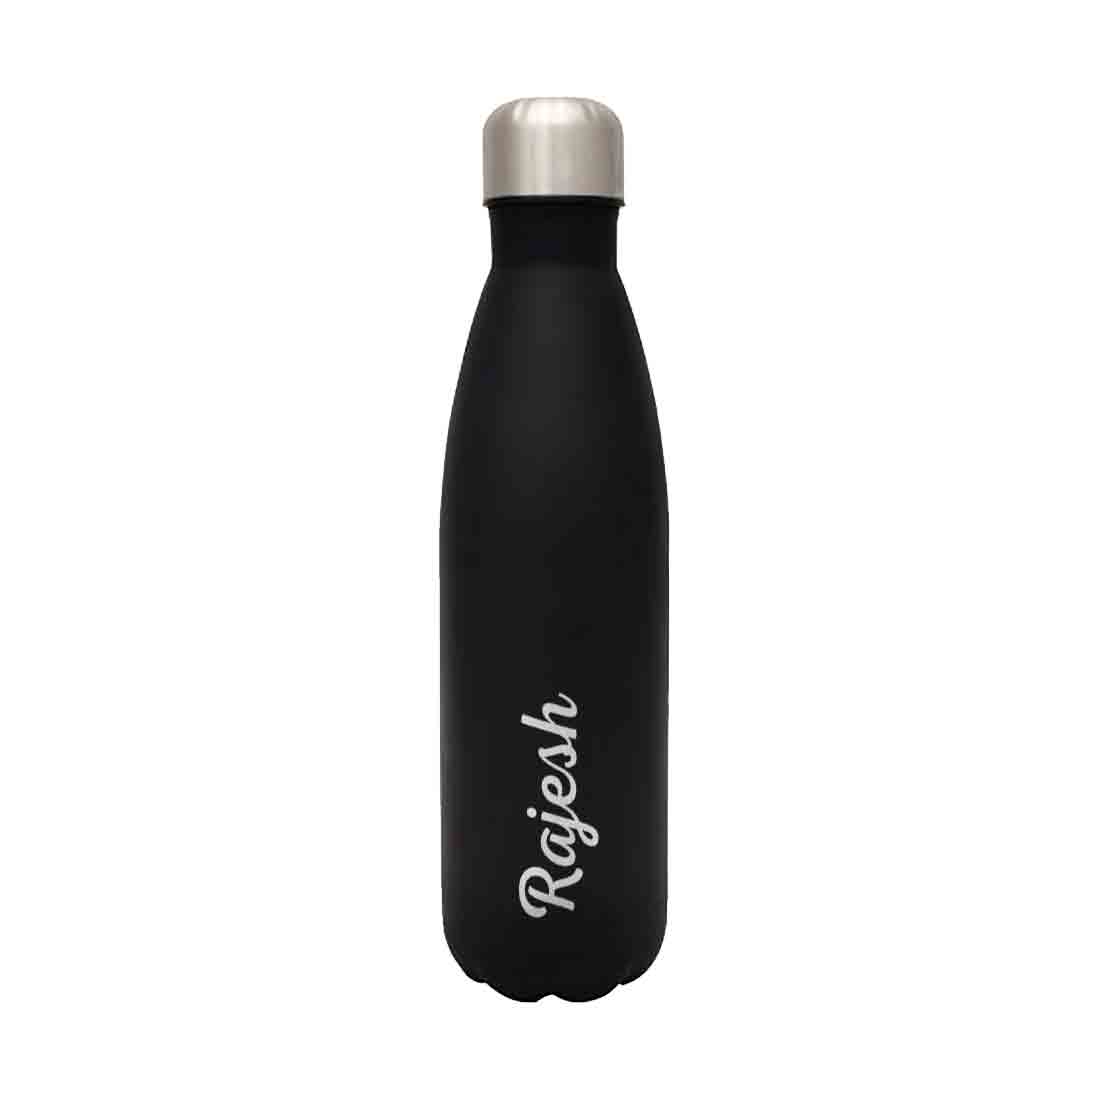 Personalized Water Bottle Insulated Stainless Steel Hot & Cold Cola Thermos - Add Name